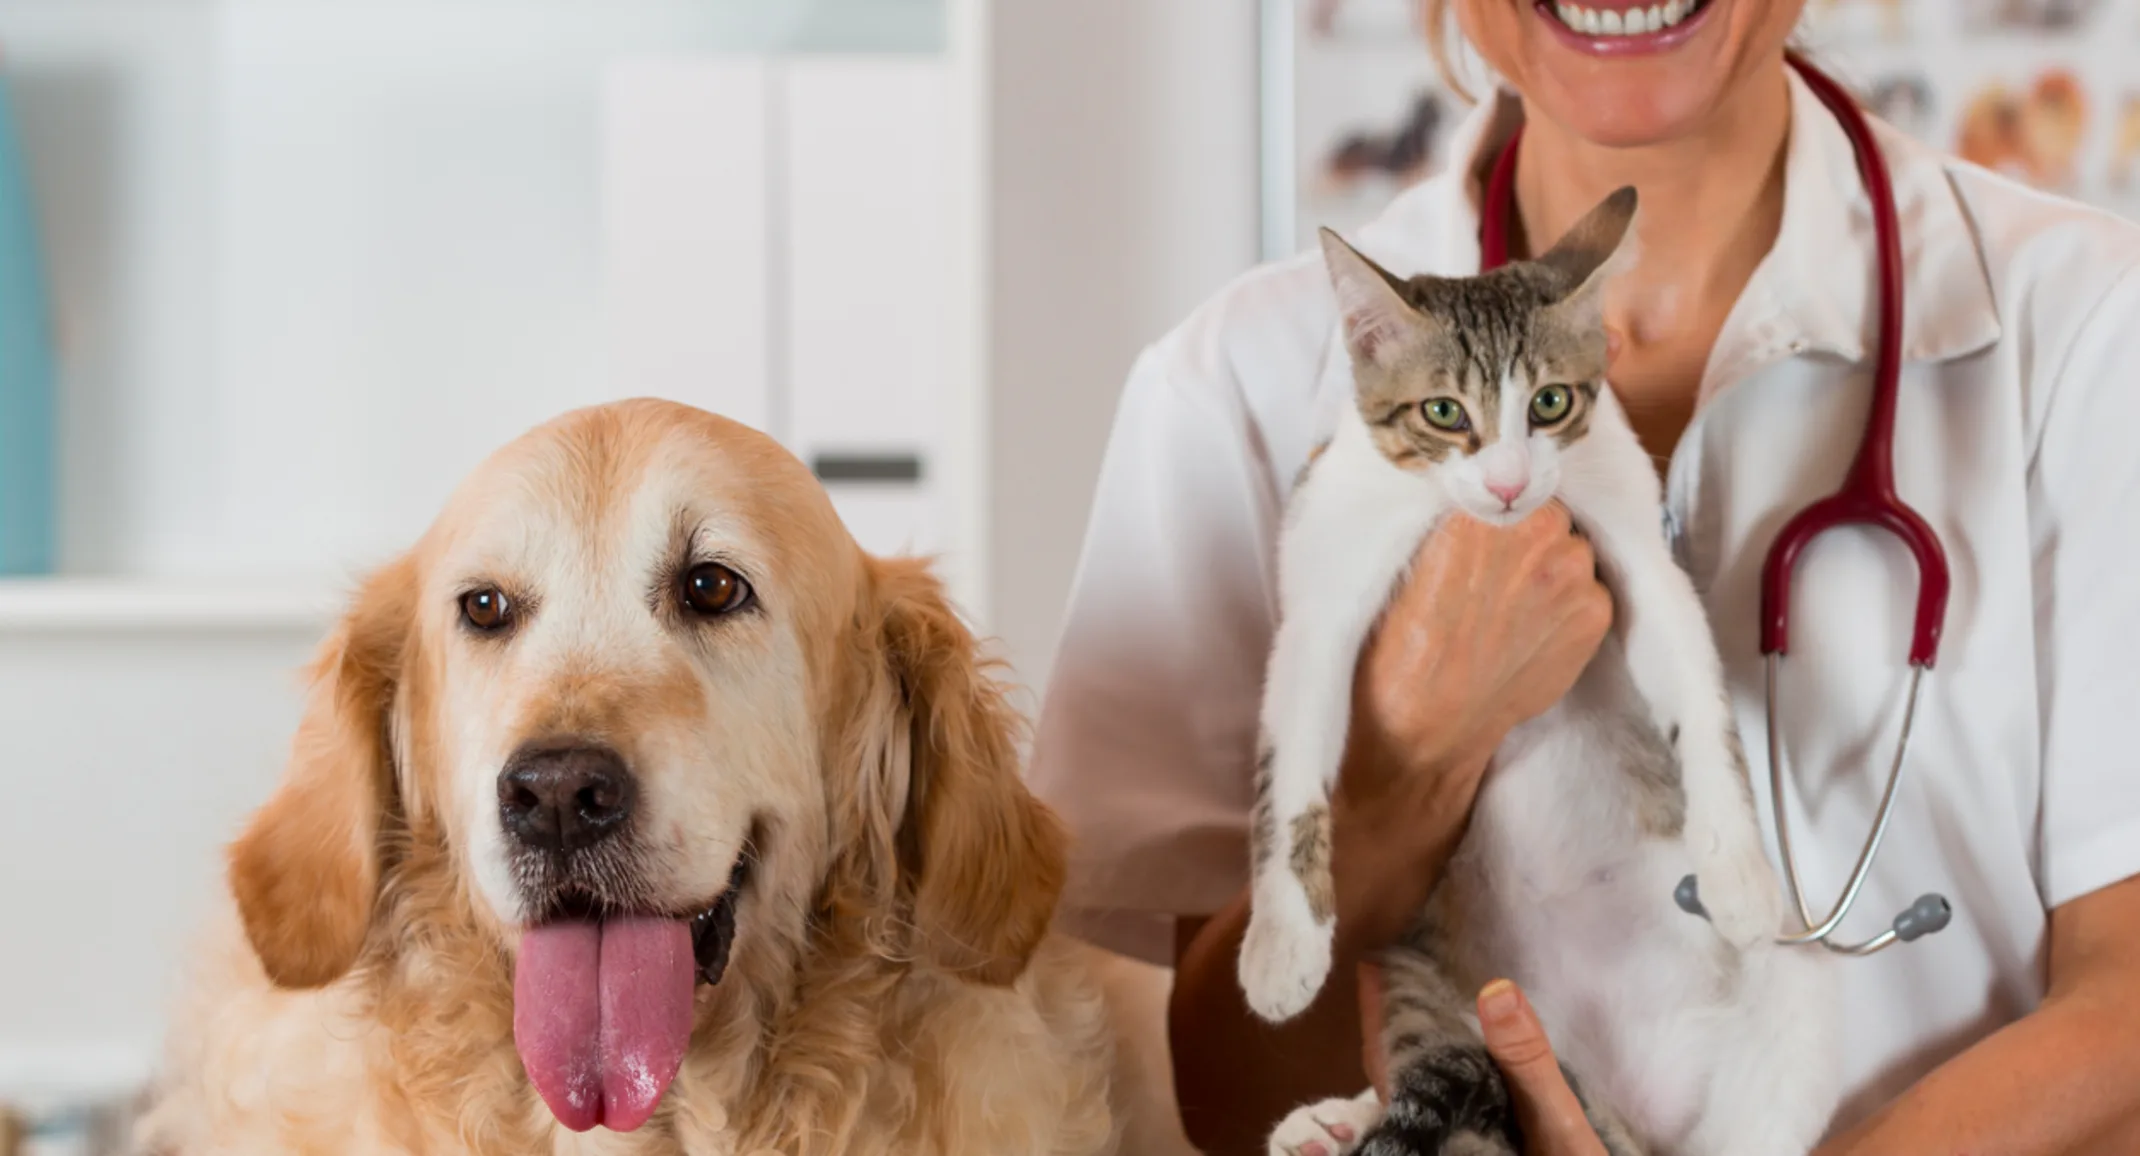 Older dog and cat getting examined by doctor